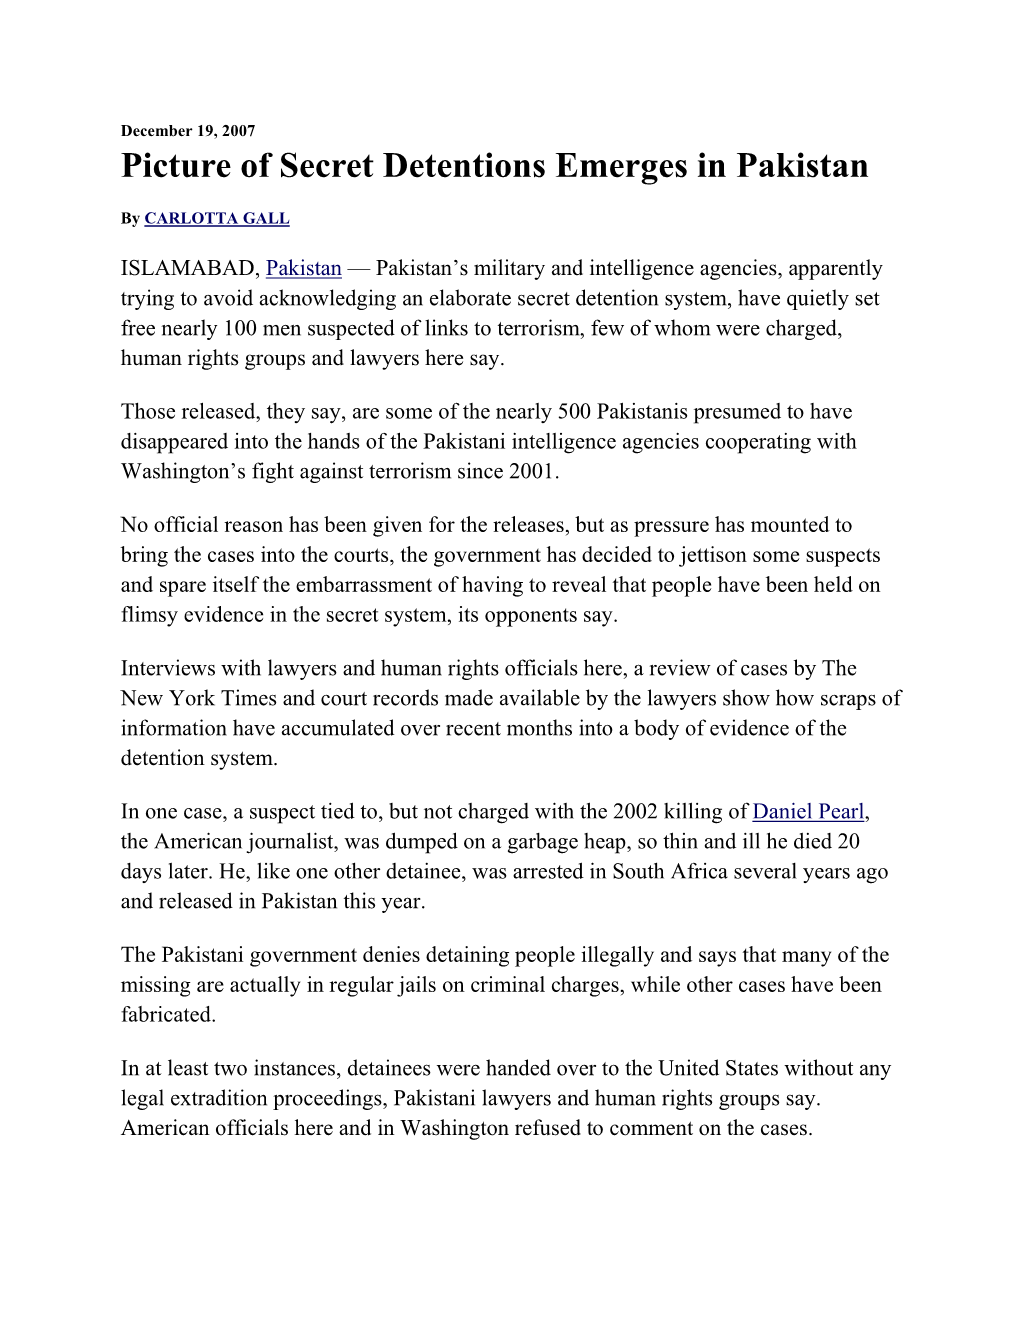 Picture of Secret Detentions Emerges in Pakistan